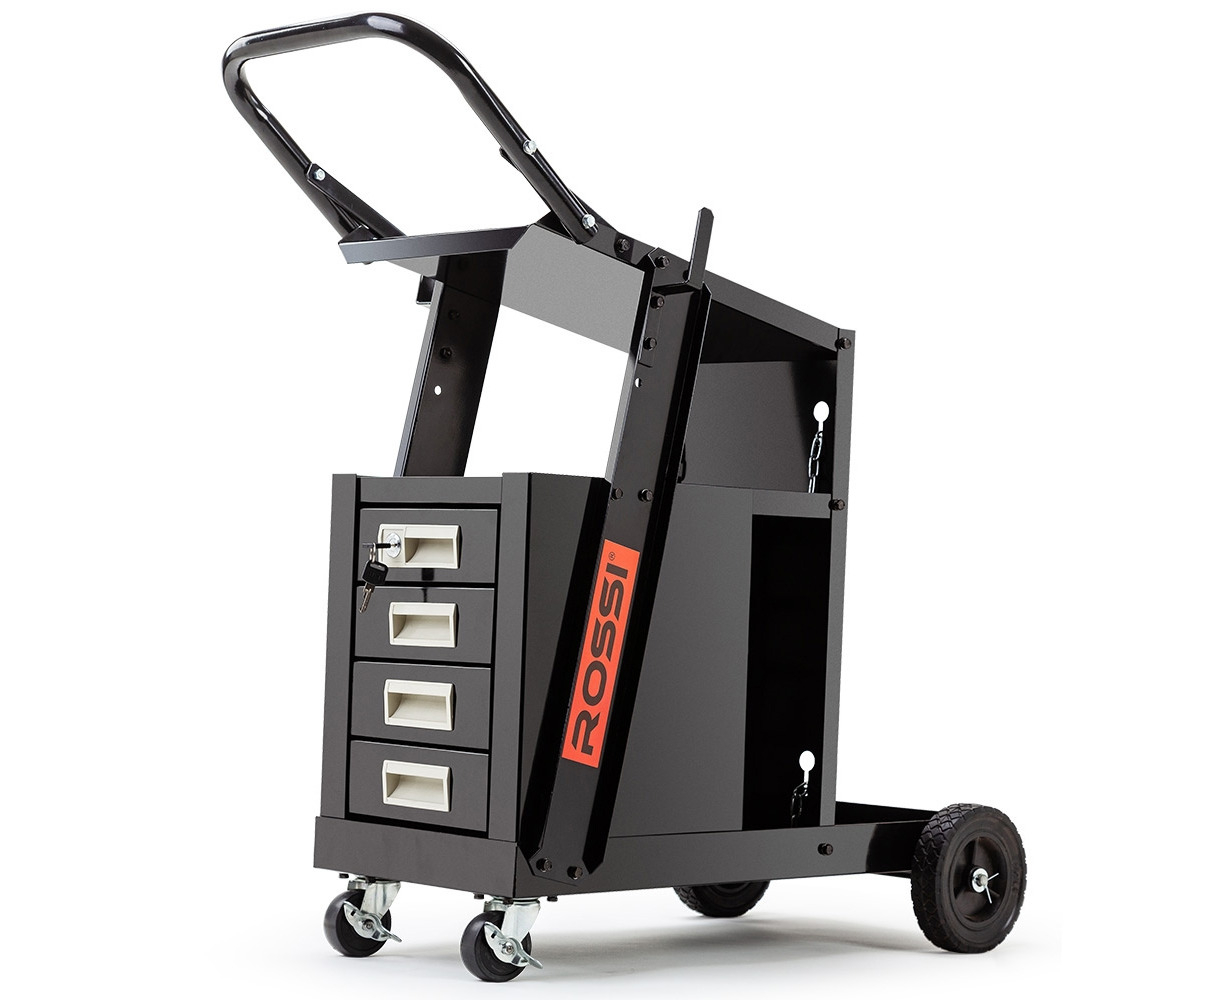 Welding Carts for MIG/TIG Welder and Plasma Cutter Black Welding Cart with 4 Drawers and Tank Storage 